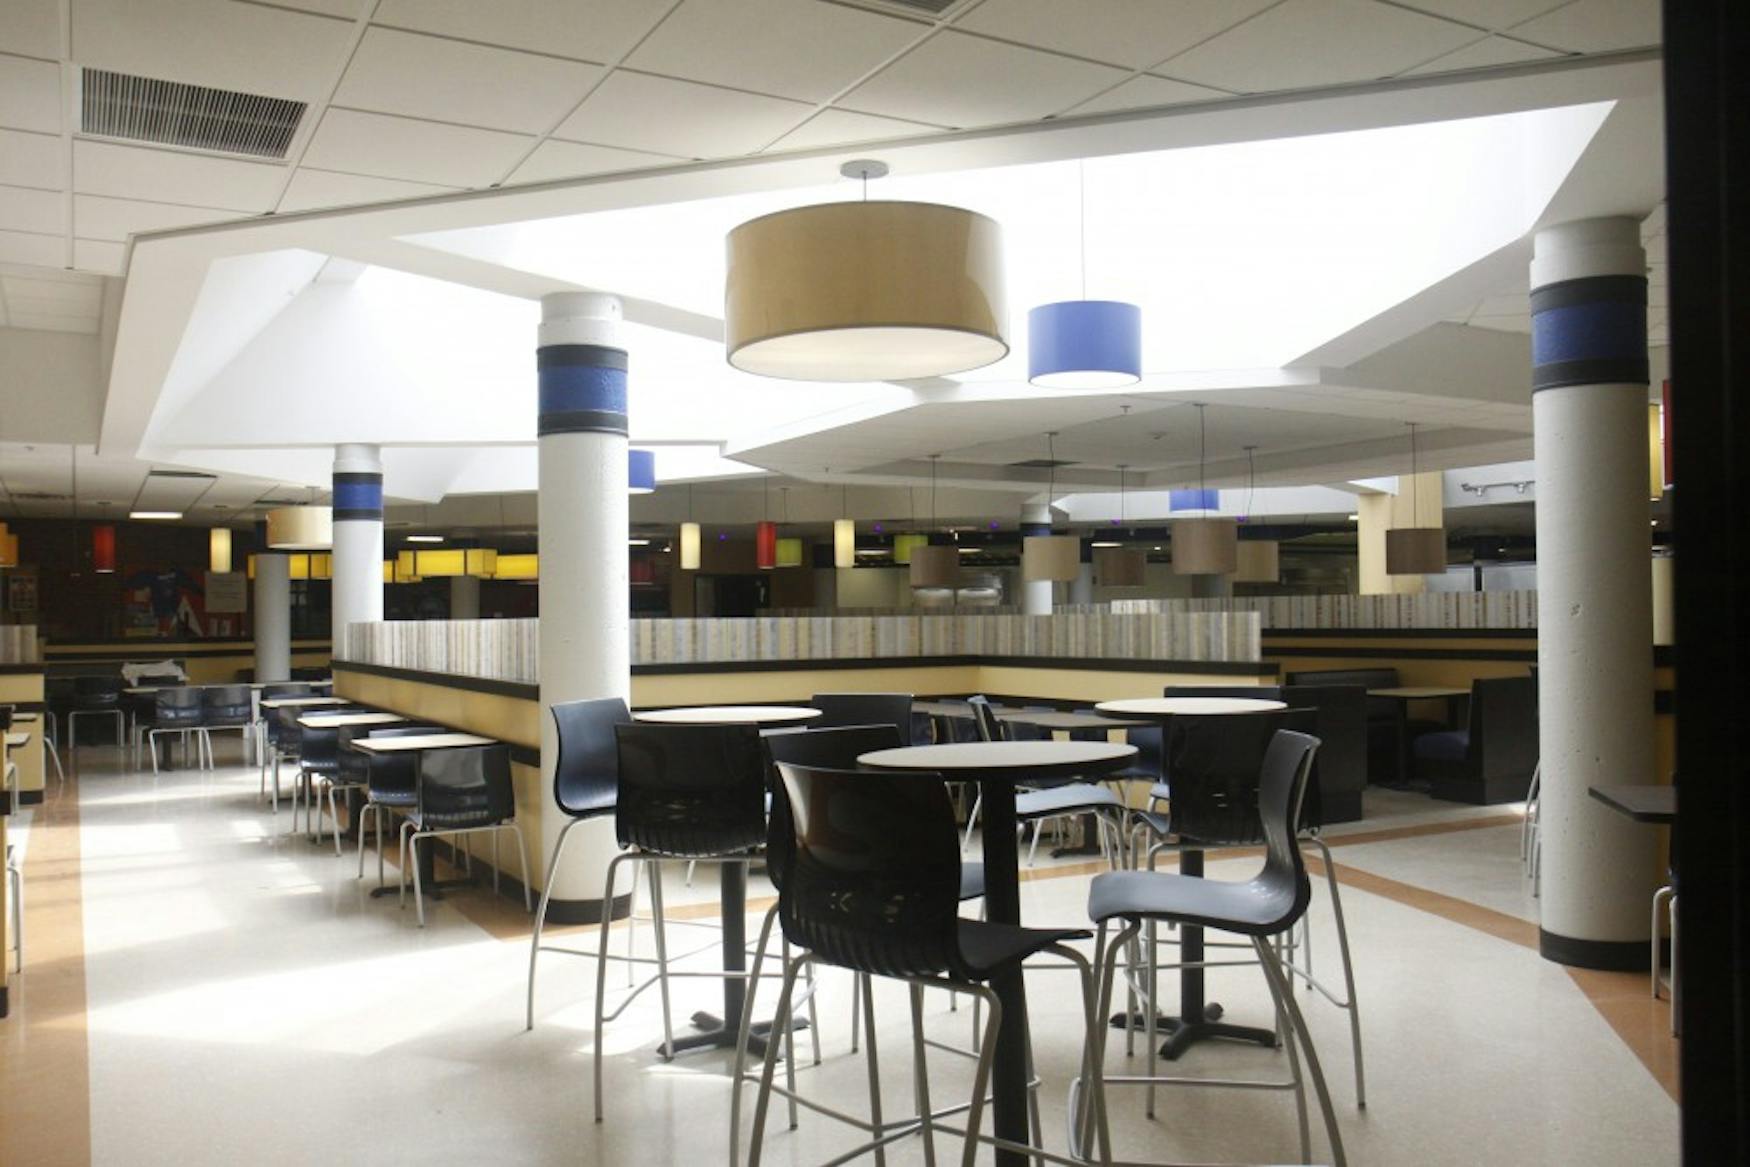 Usdan Student Center received an update over the summer, one of several changes across dining services.